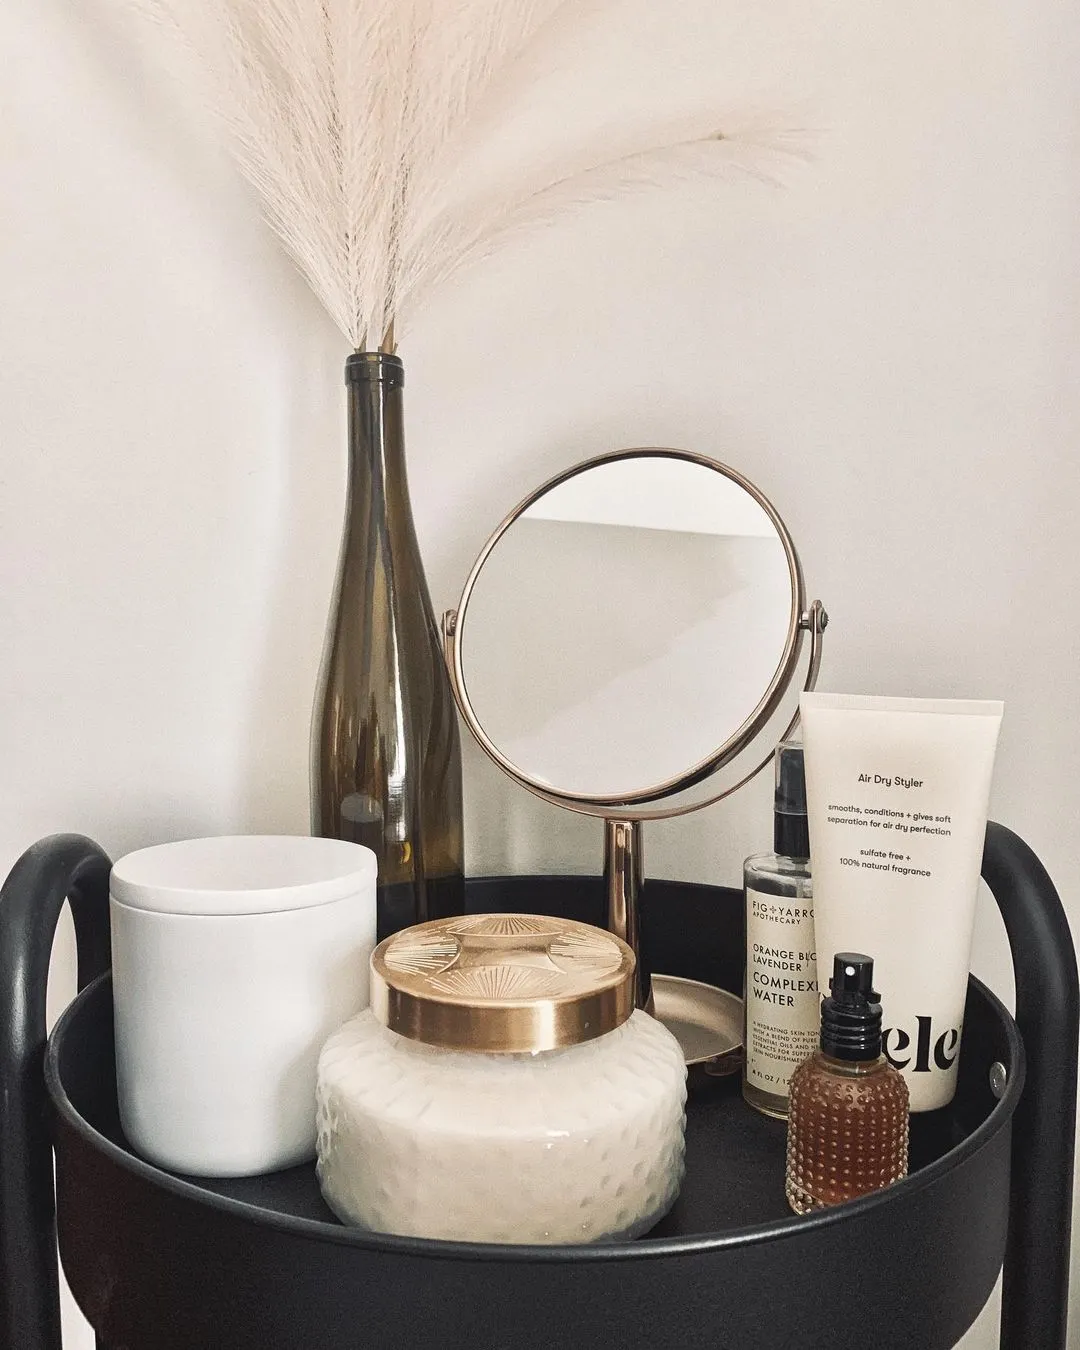 Odele Air Dry Styler on a nightstand with candles, plants and a mirror